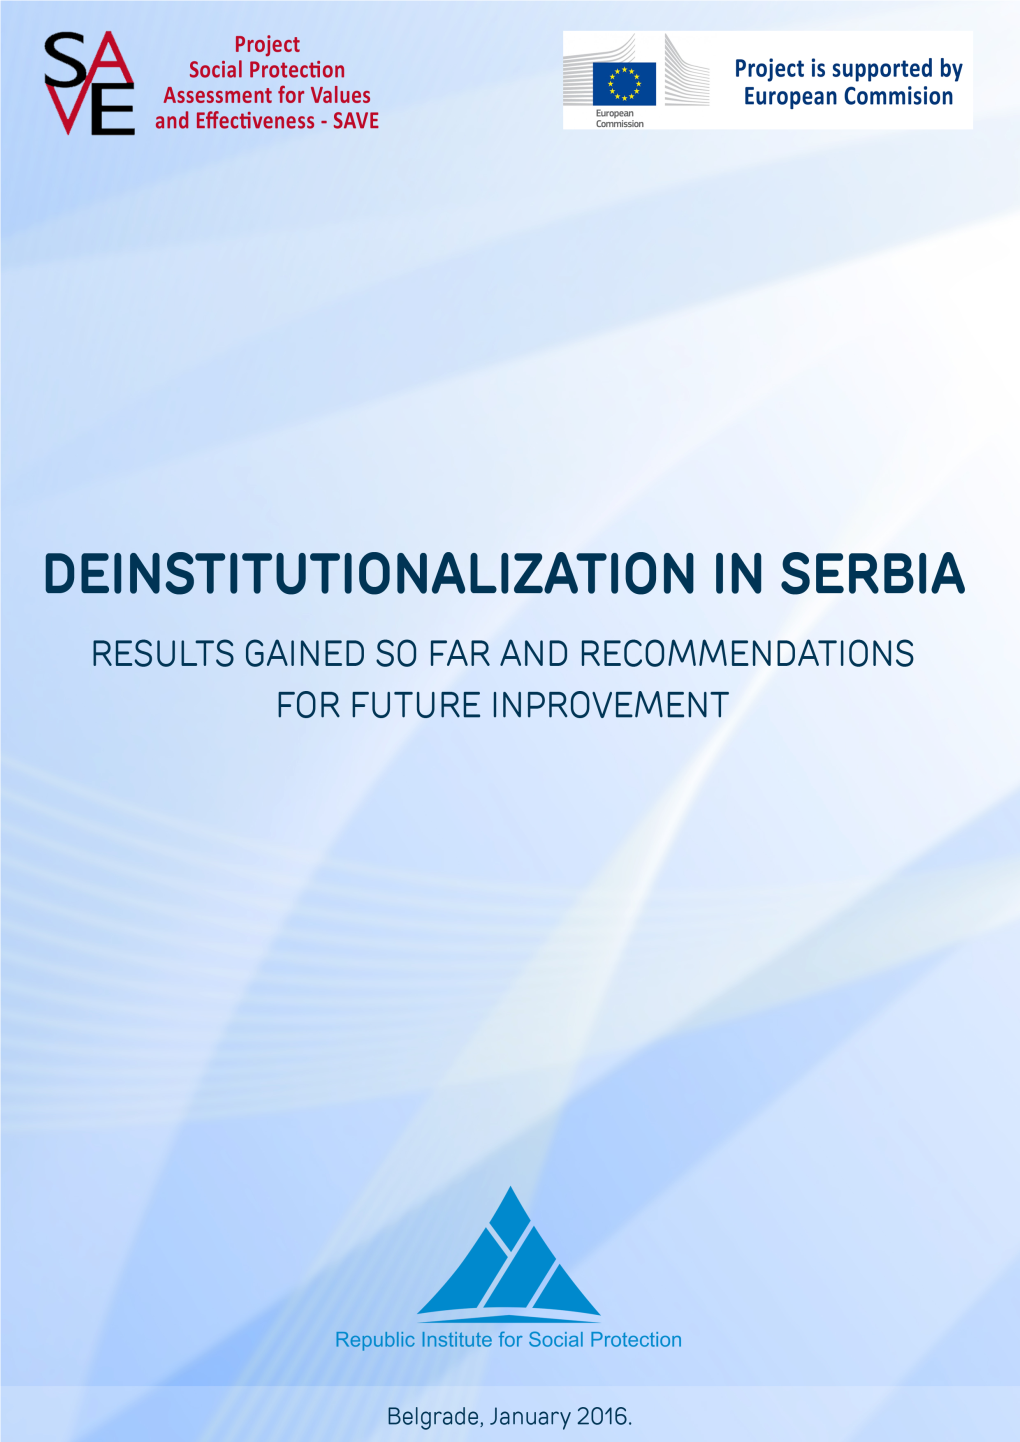 Deinstitutionalization in Serbia - Results Gained So Far and Page | 2 Recommendations for Future Improvement